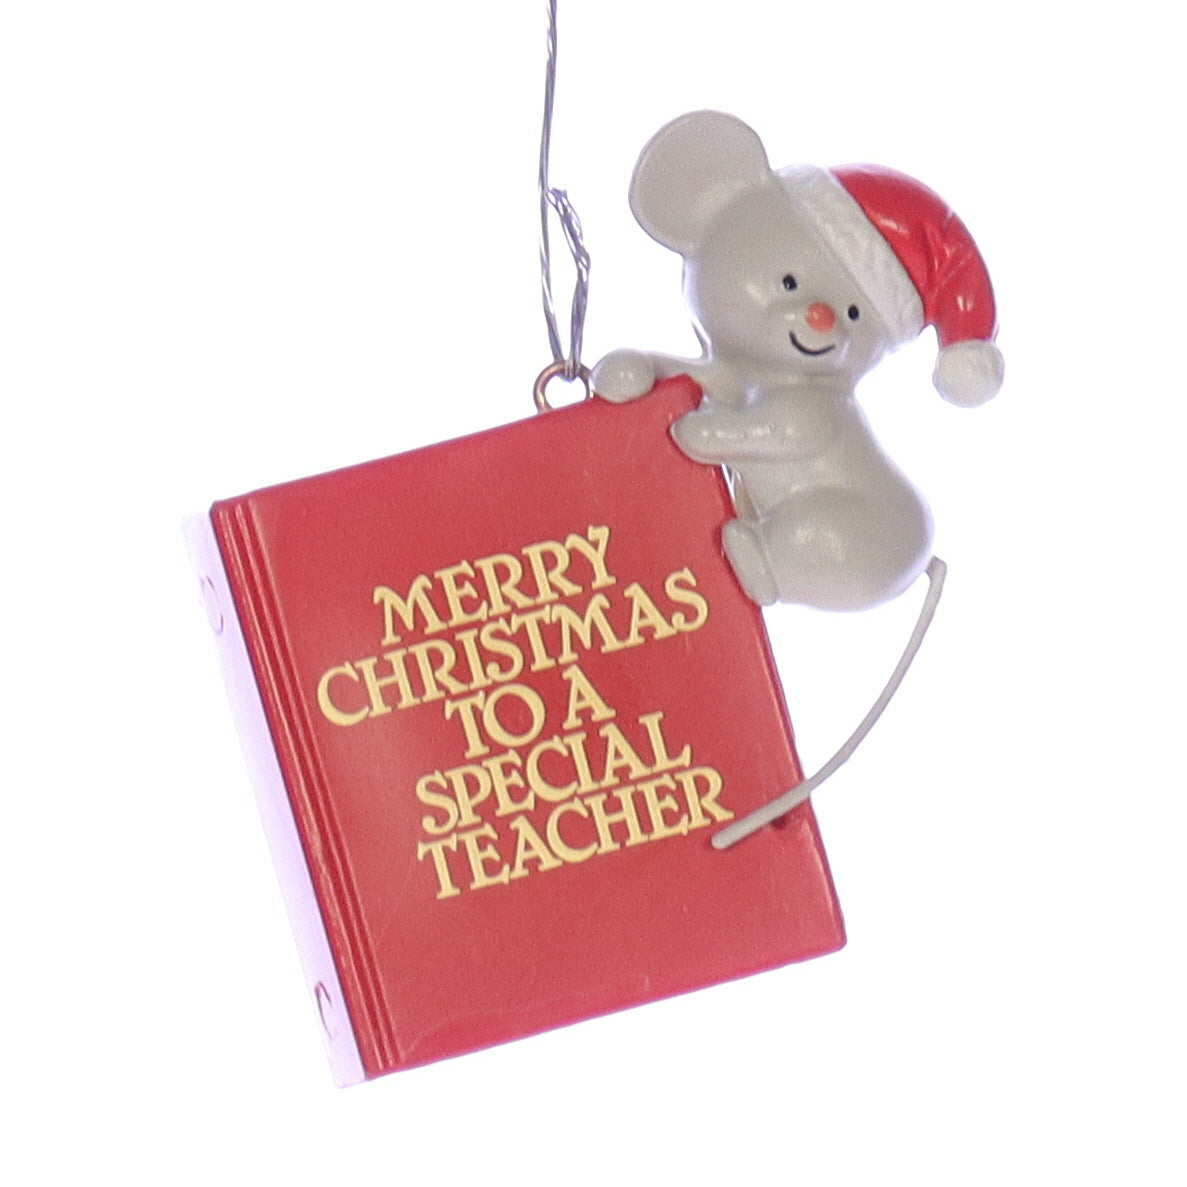 Enesco_Treasury_of_Christmas_Ornaments_specialteacher_To_A_Special_Teacher_Mouse_Ornament_1983 Front View